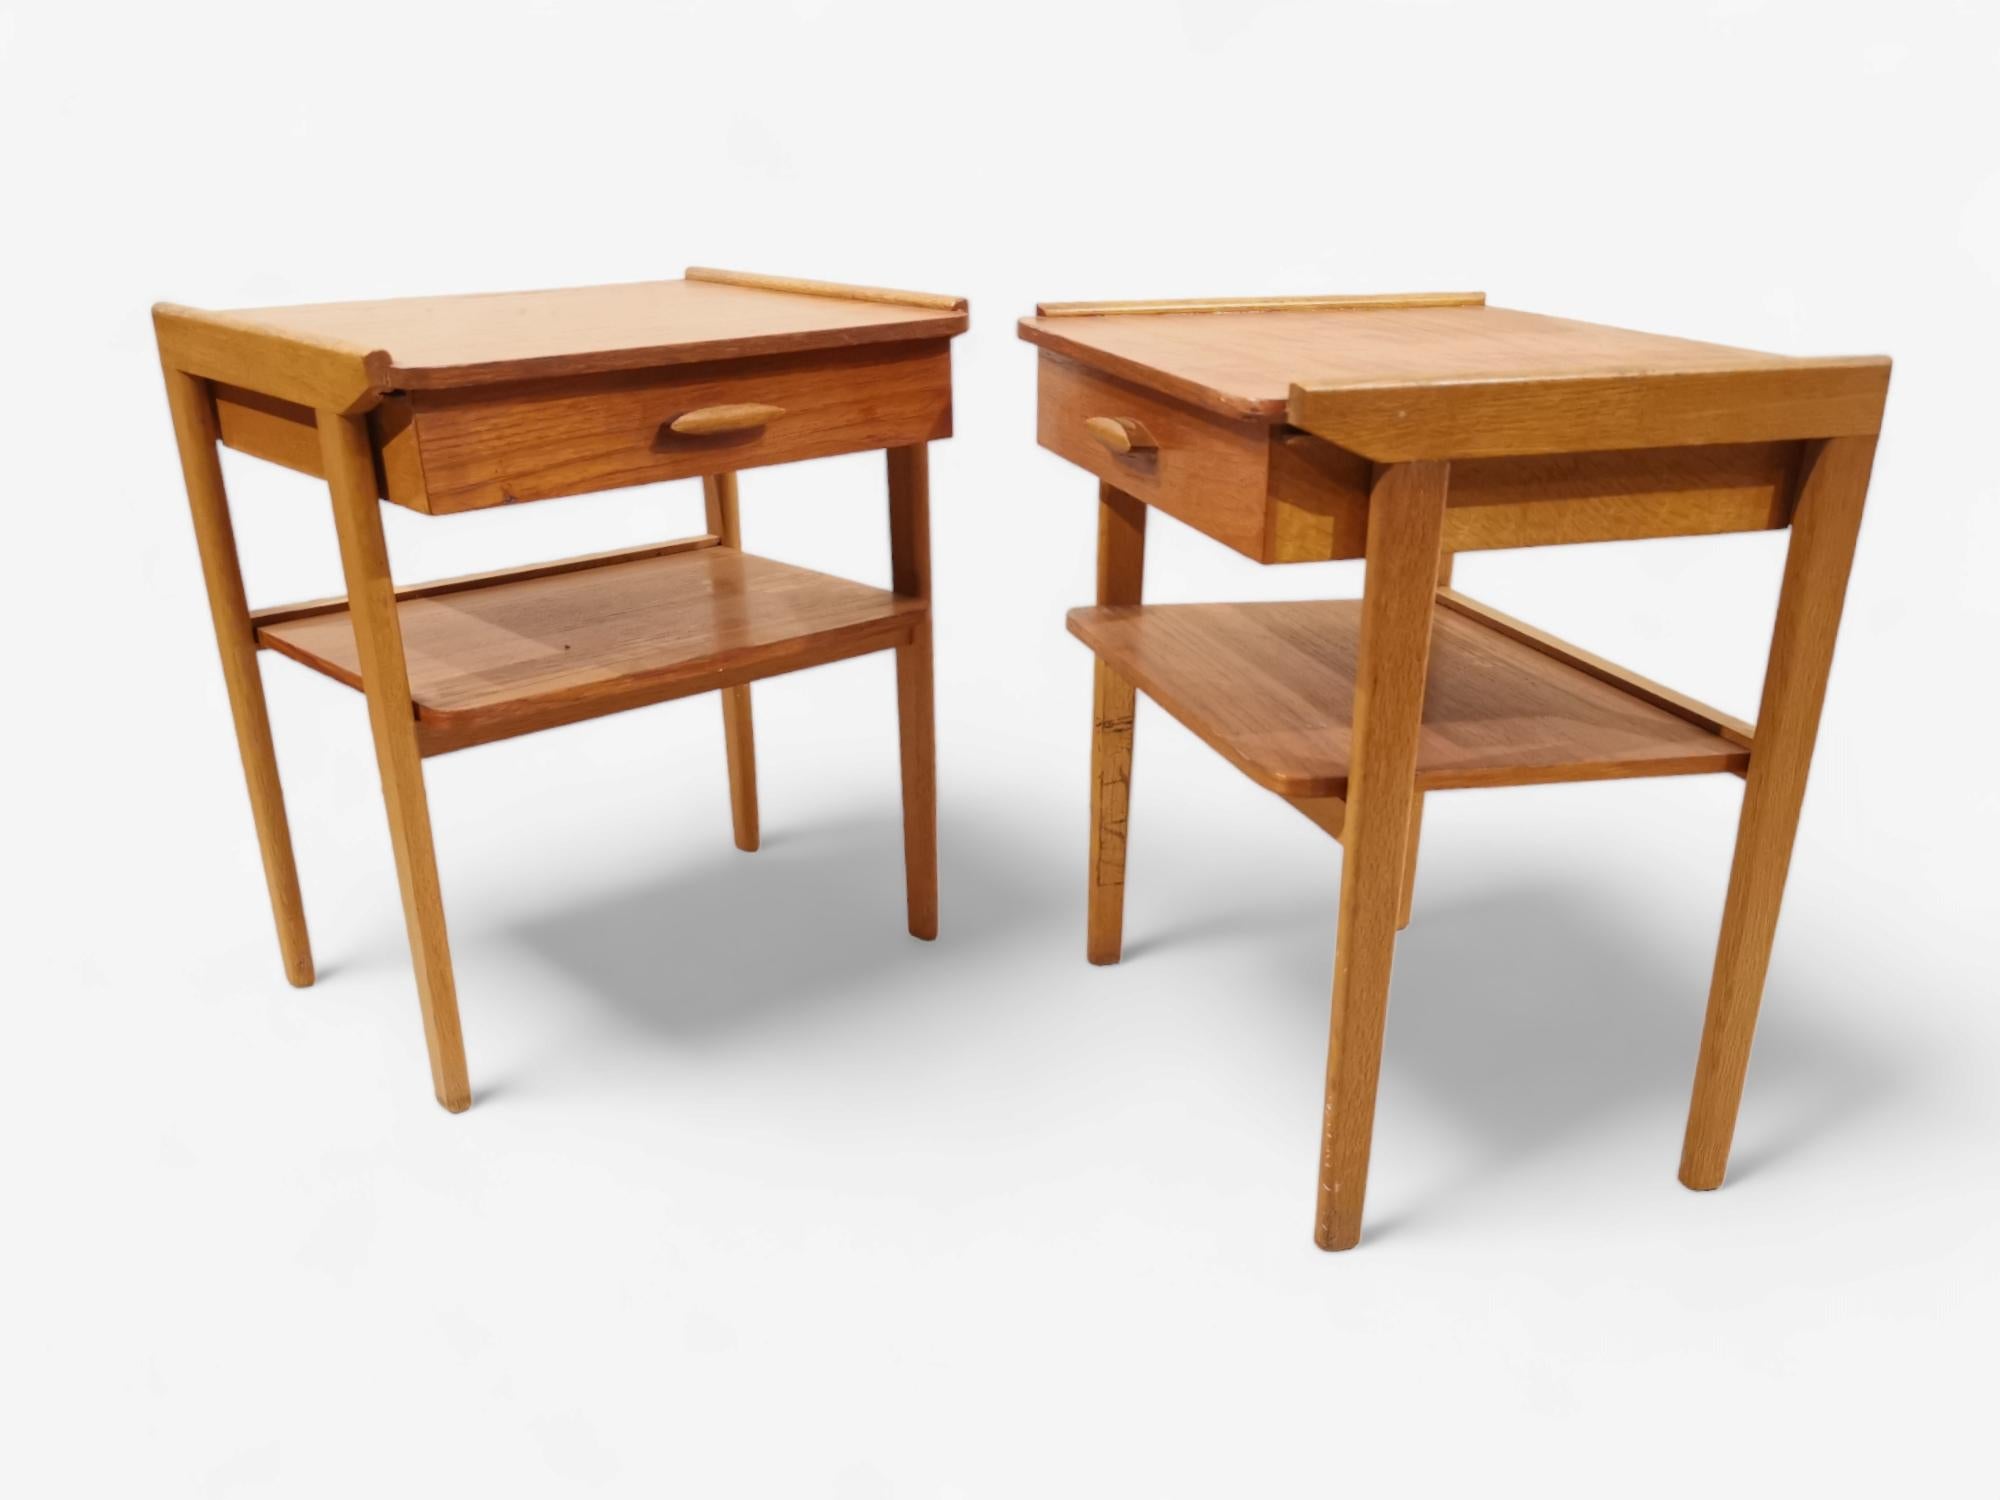 2 matching Classic Swedish bedside tables from the 60s,
With a drawer in each bedside table, so you can
store away, and keep your space organized and clutter-free.
These Swedish  bedside tables is characterized by clean lines, minimalistic